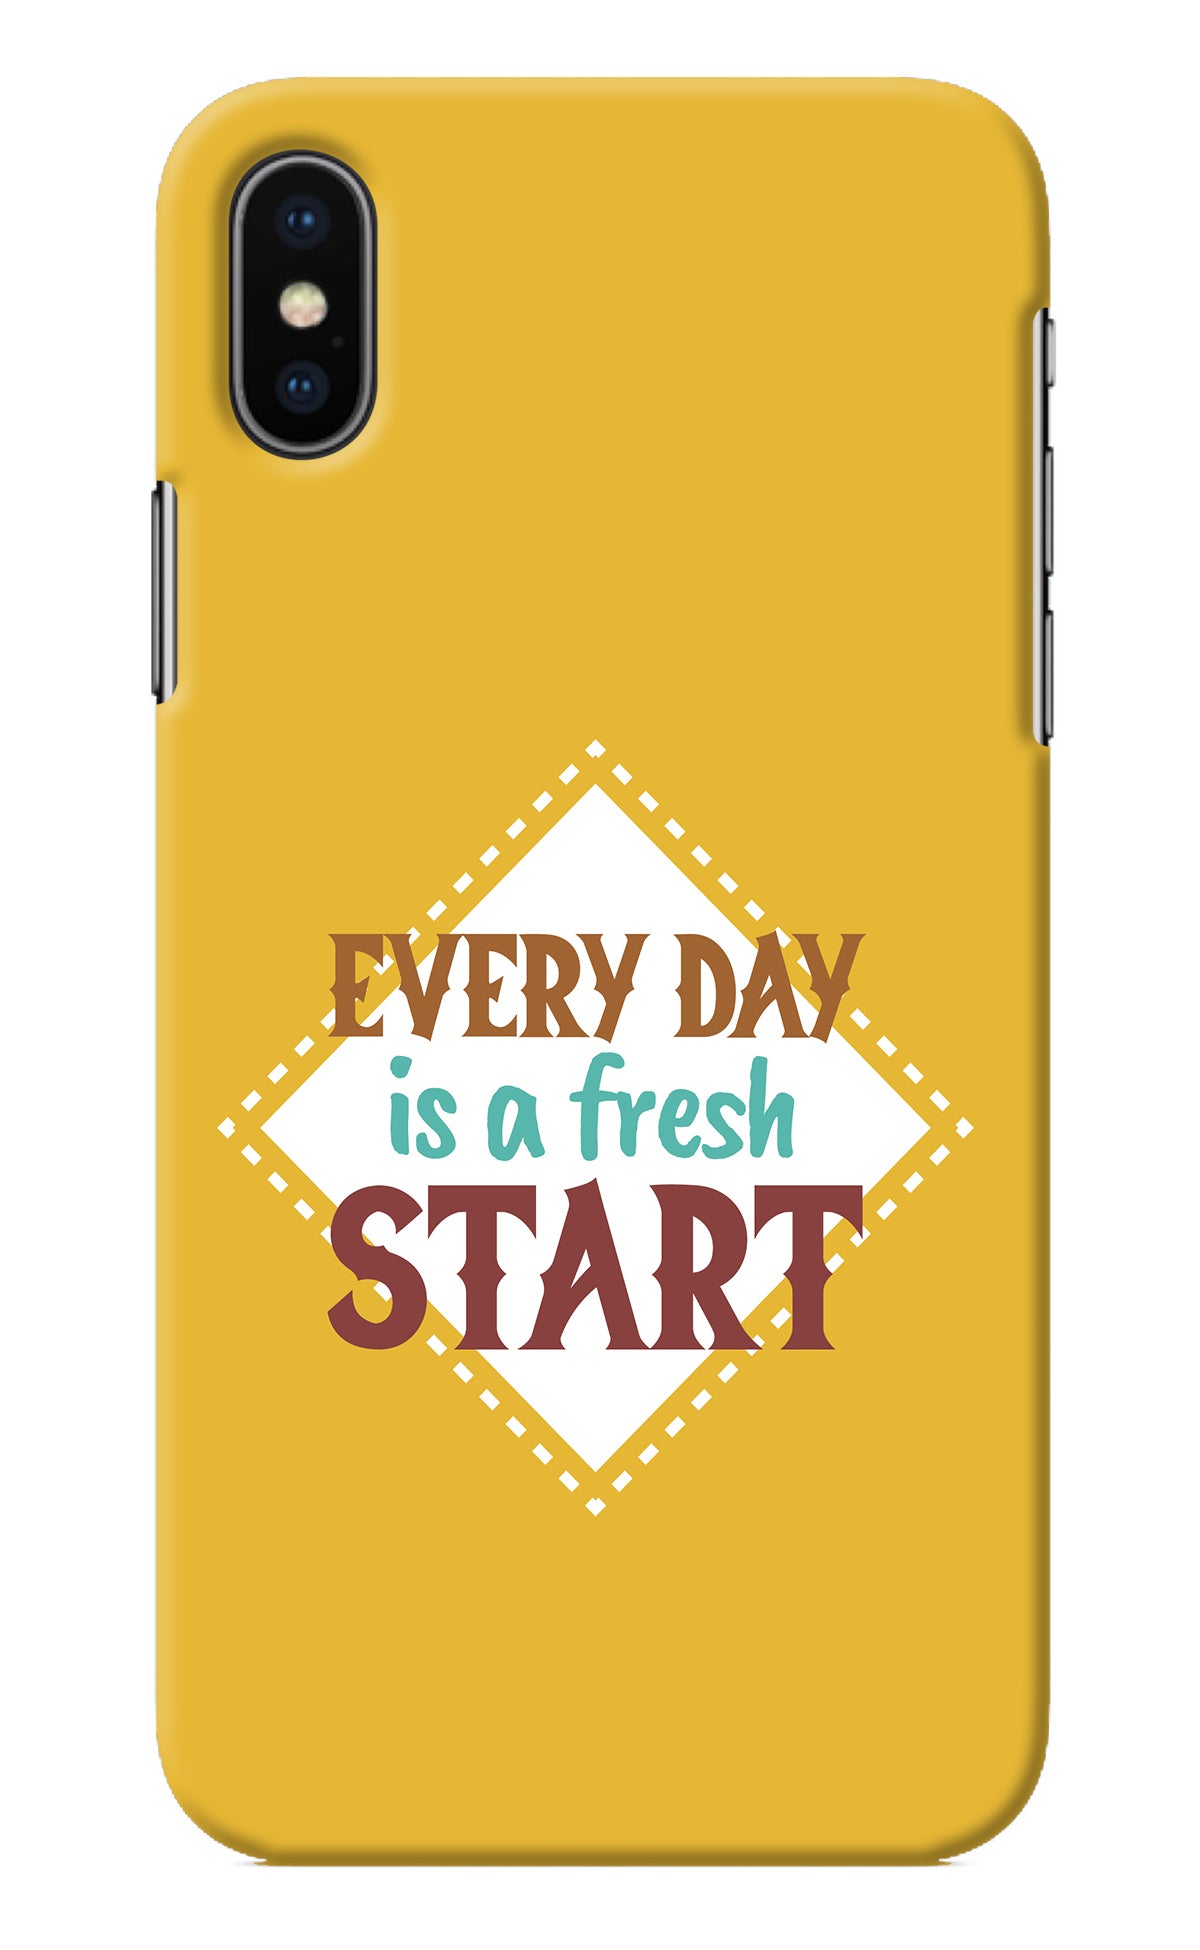 Every day is a Fresh Start iPhone X Back Cover